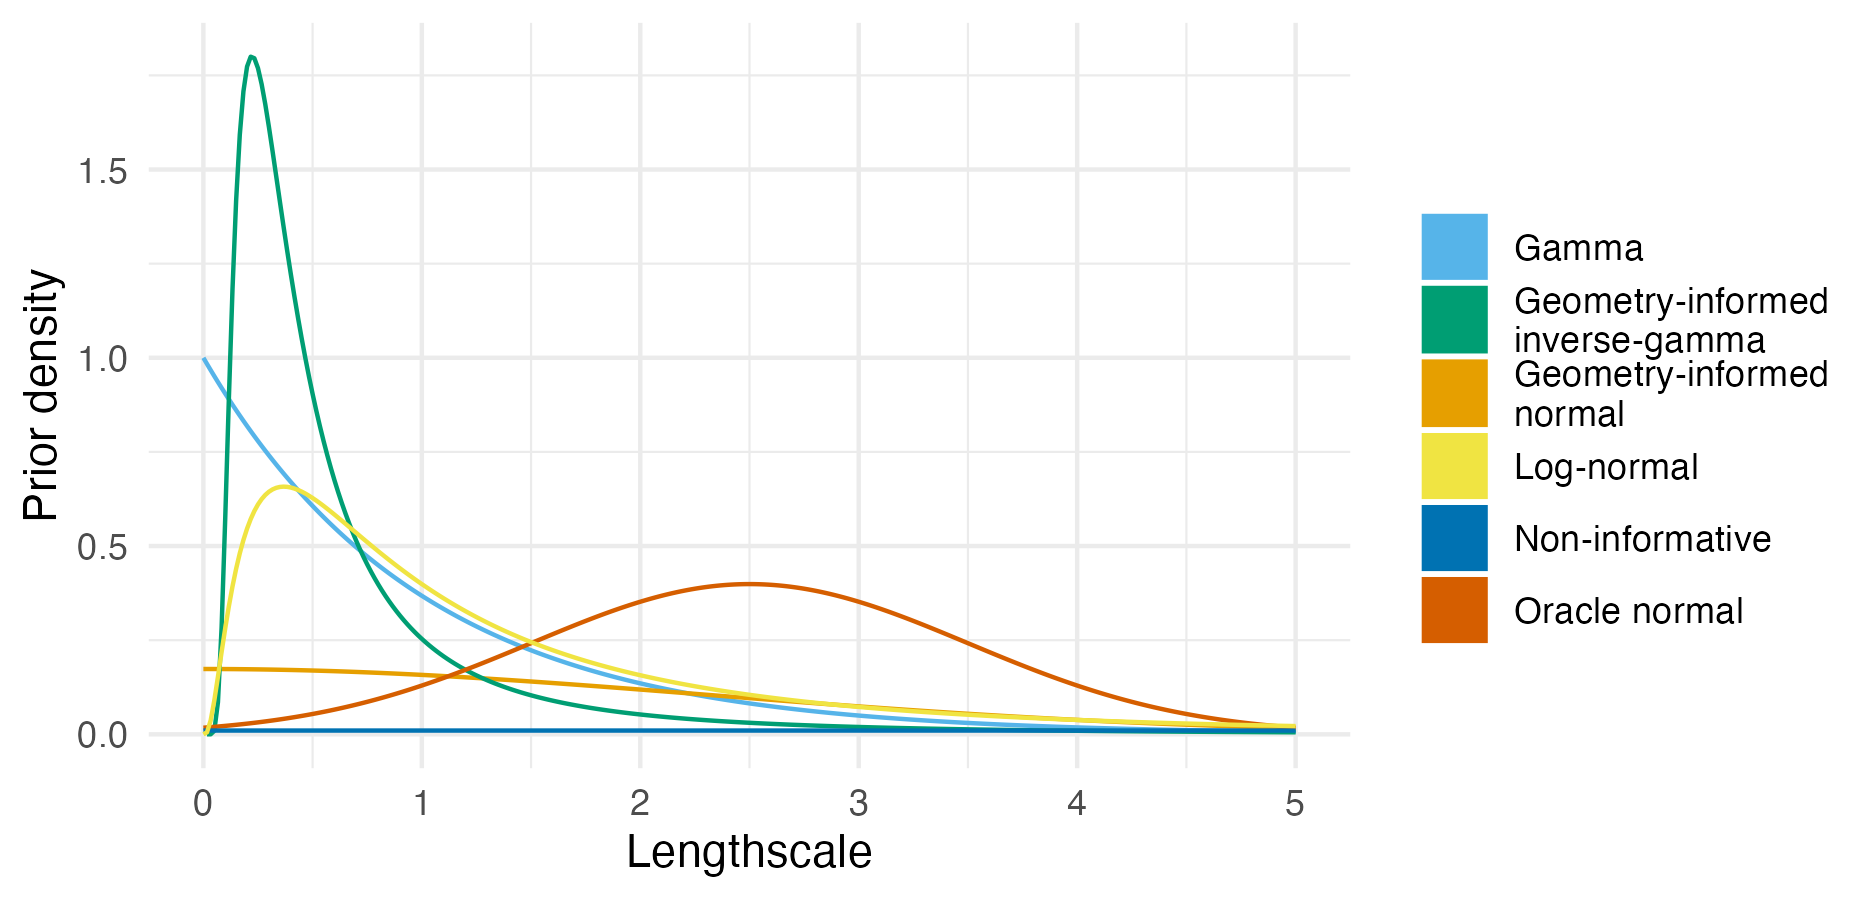 The probability density for each lengthscale prior distribution as given in Table A.1.